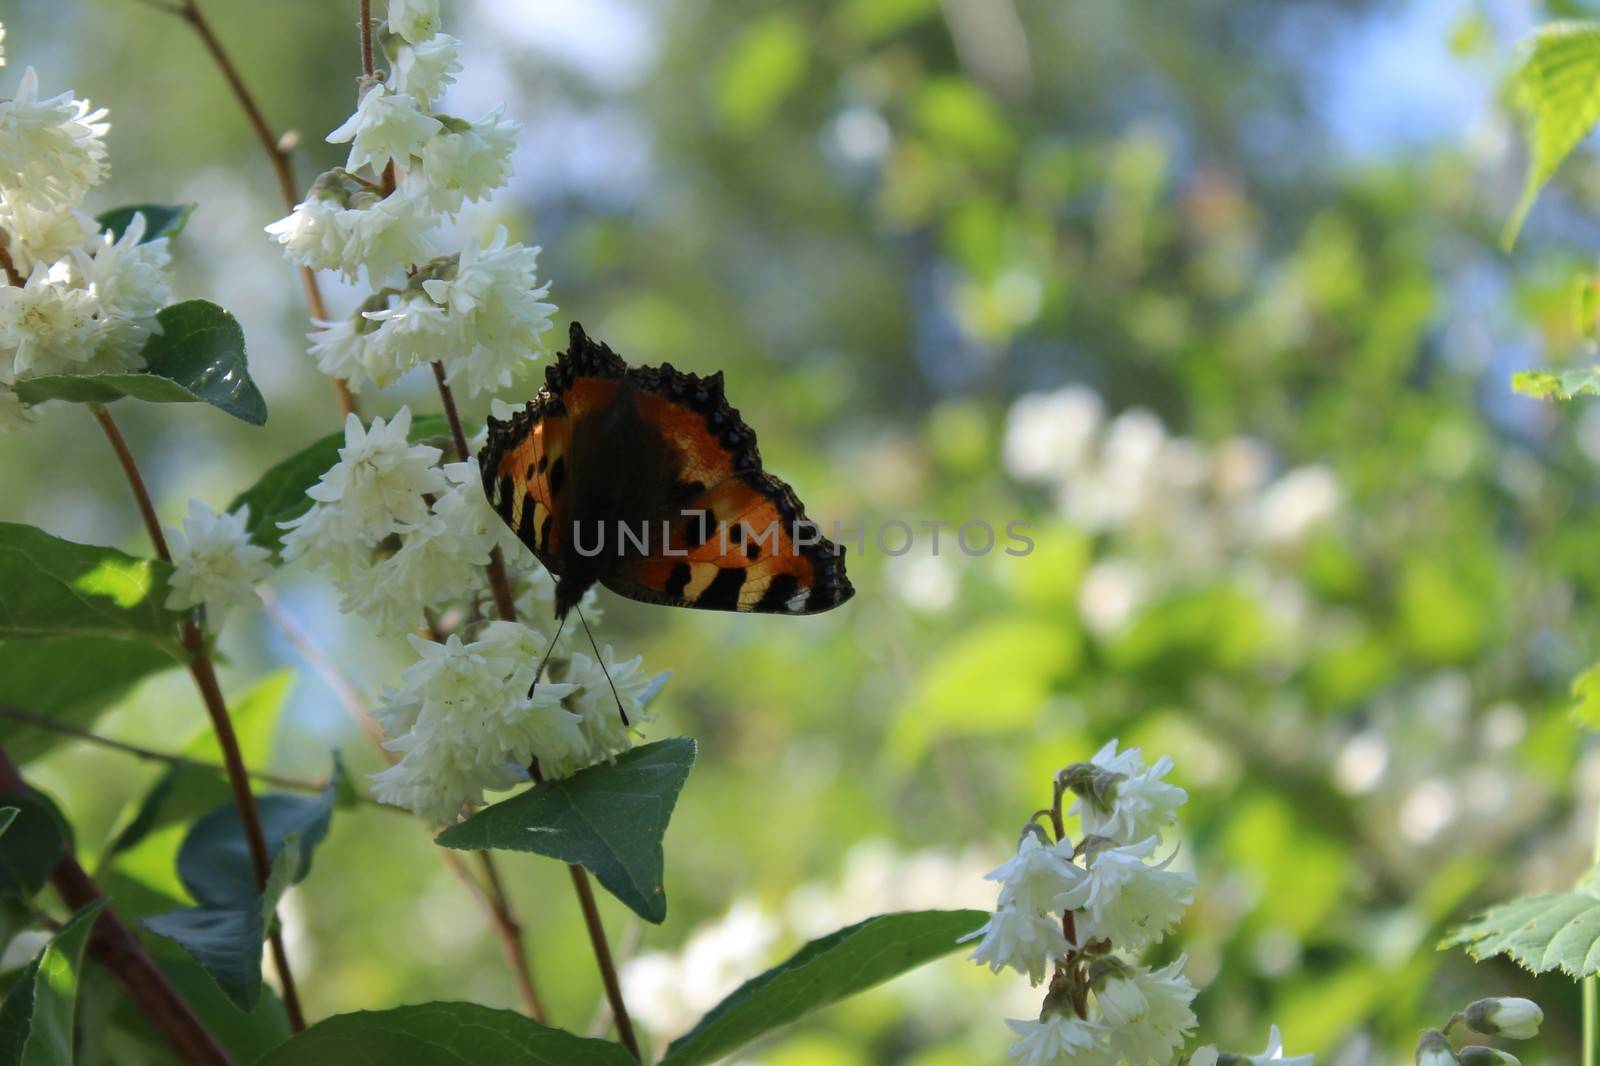 The picture shows a butterfly in the jasmine in the garden.